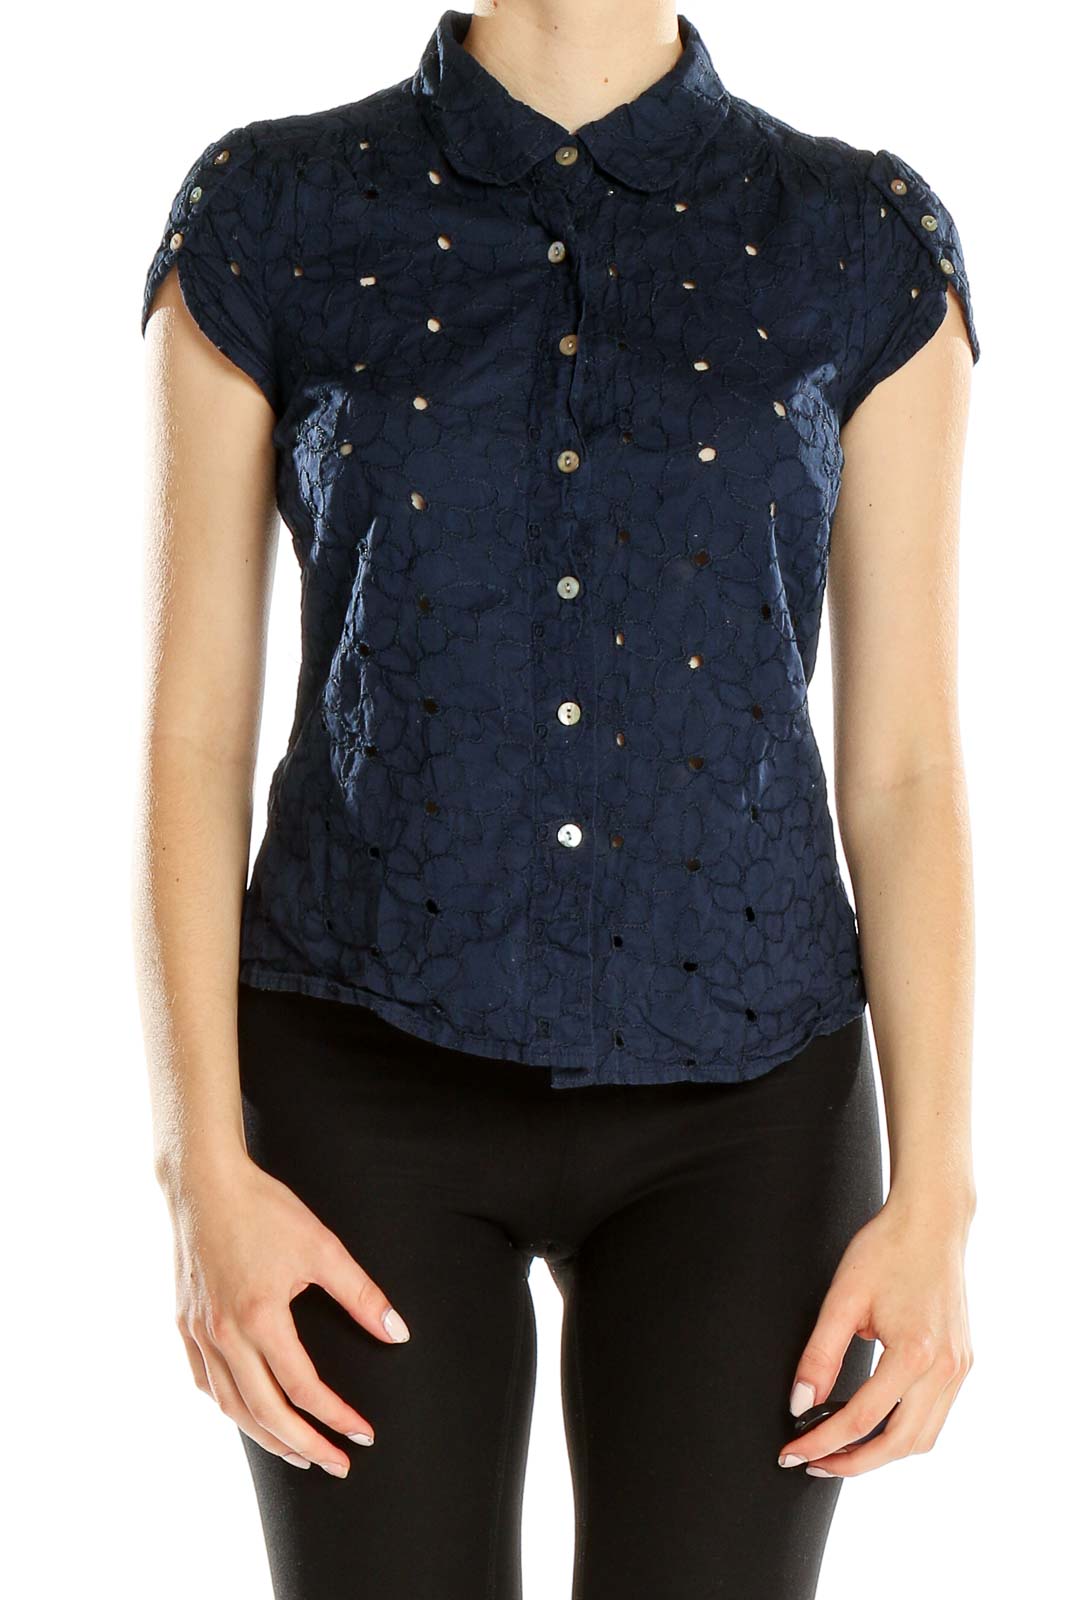 Blue Eyelet Lace Chic Top Front